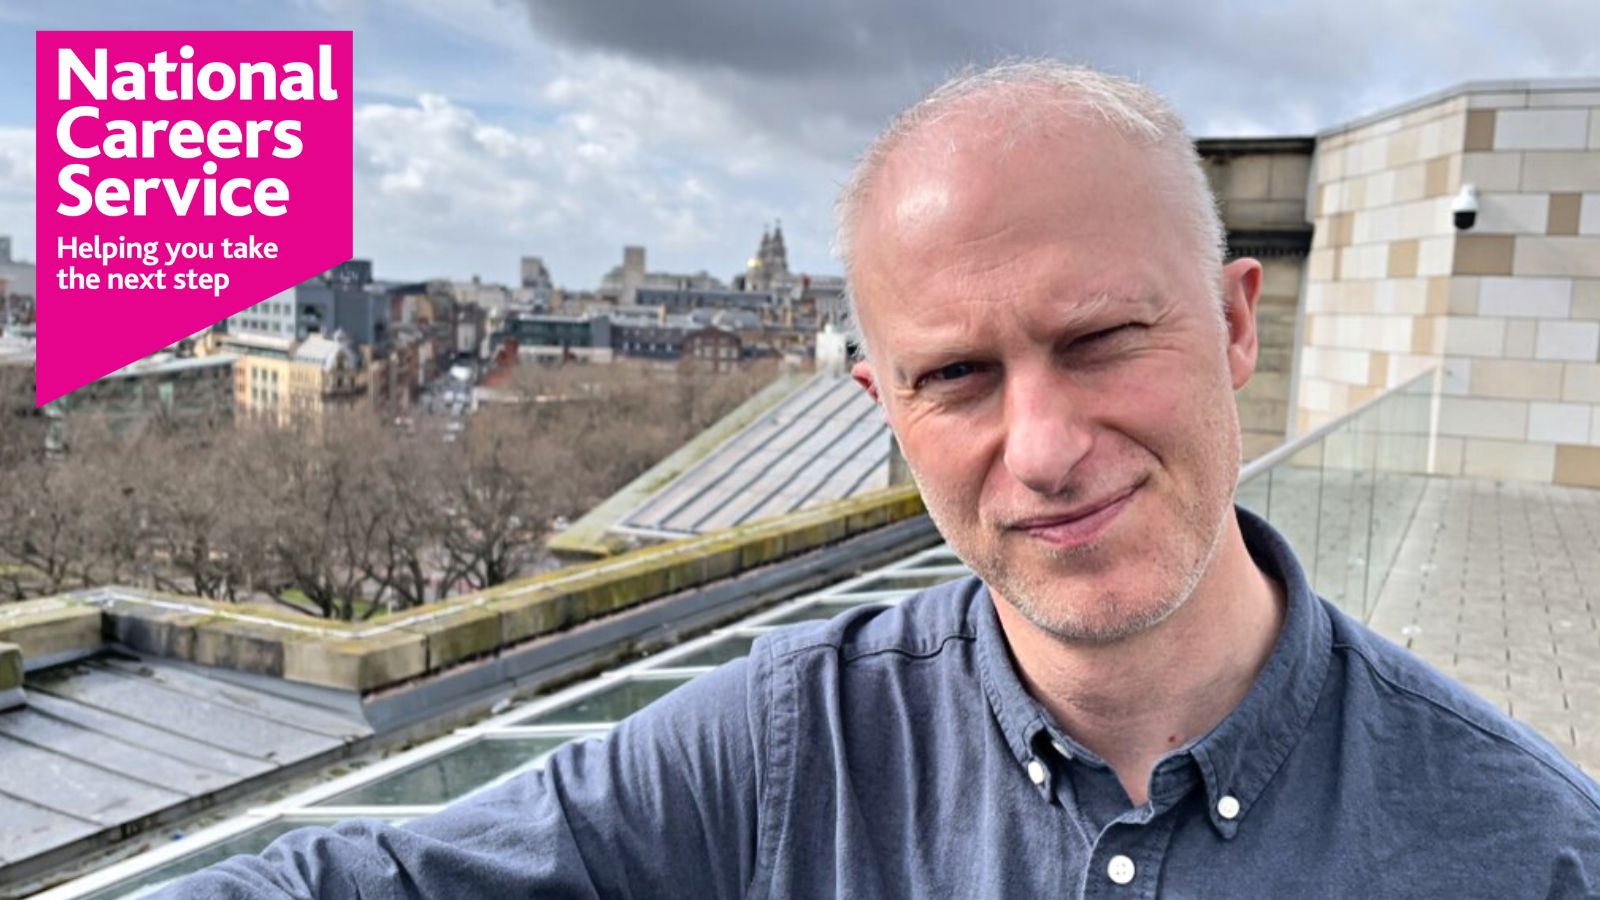 Careers adviser, Mark, on the rooftop at Liverpool Central Library